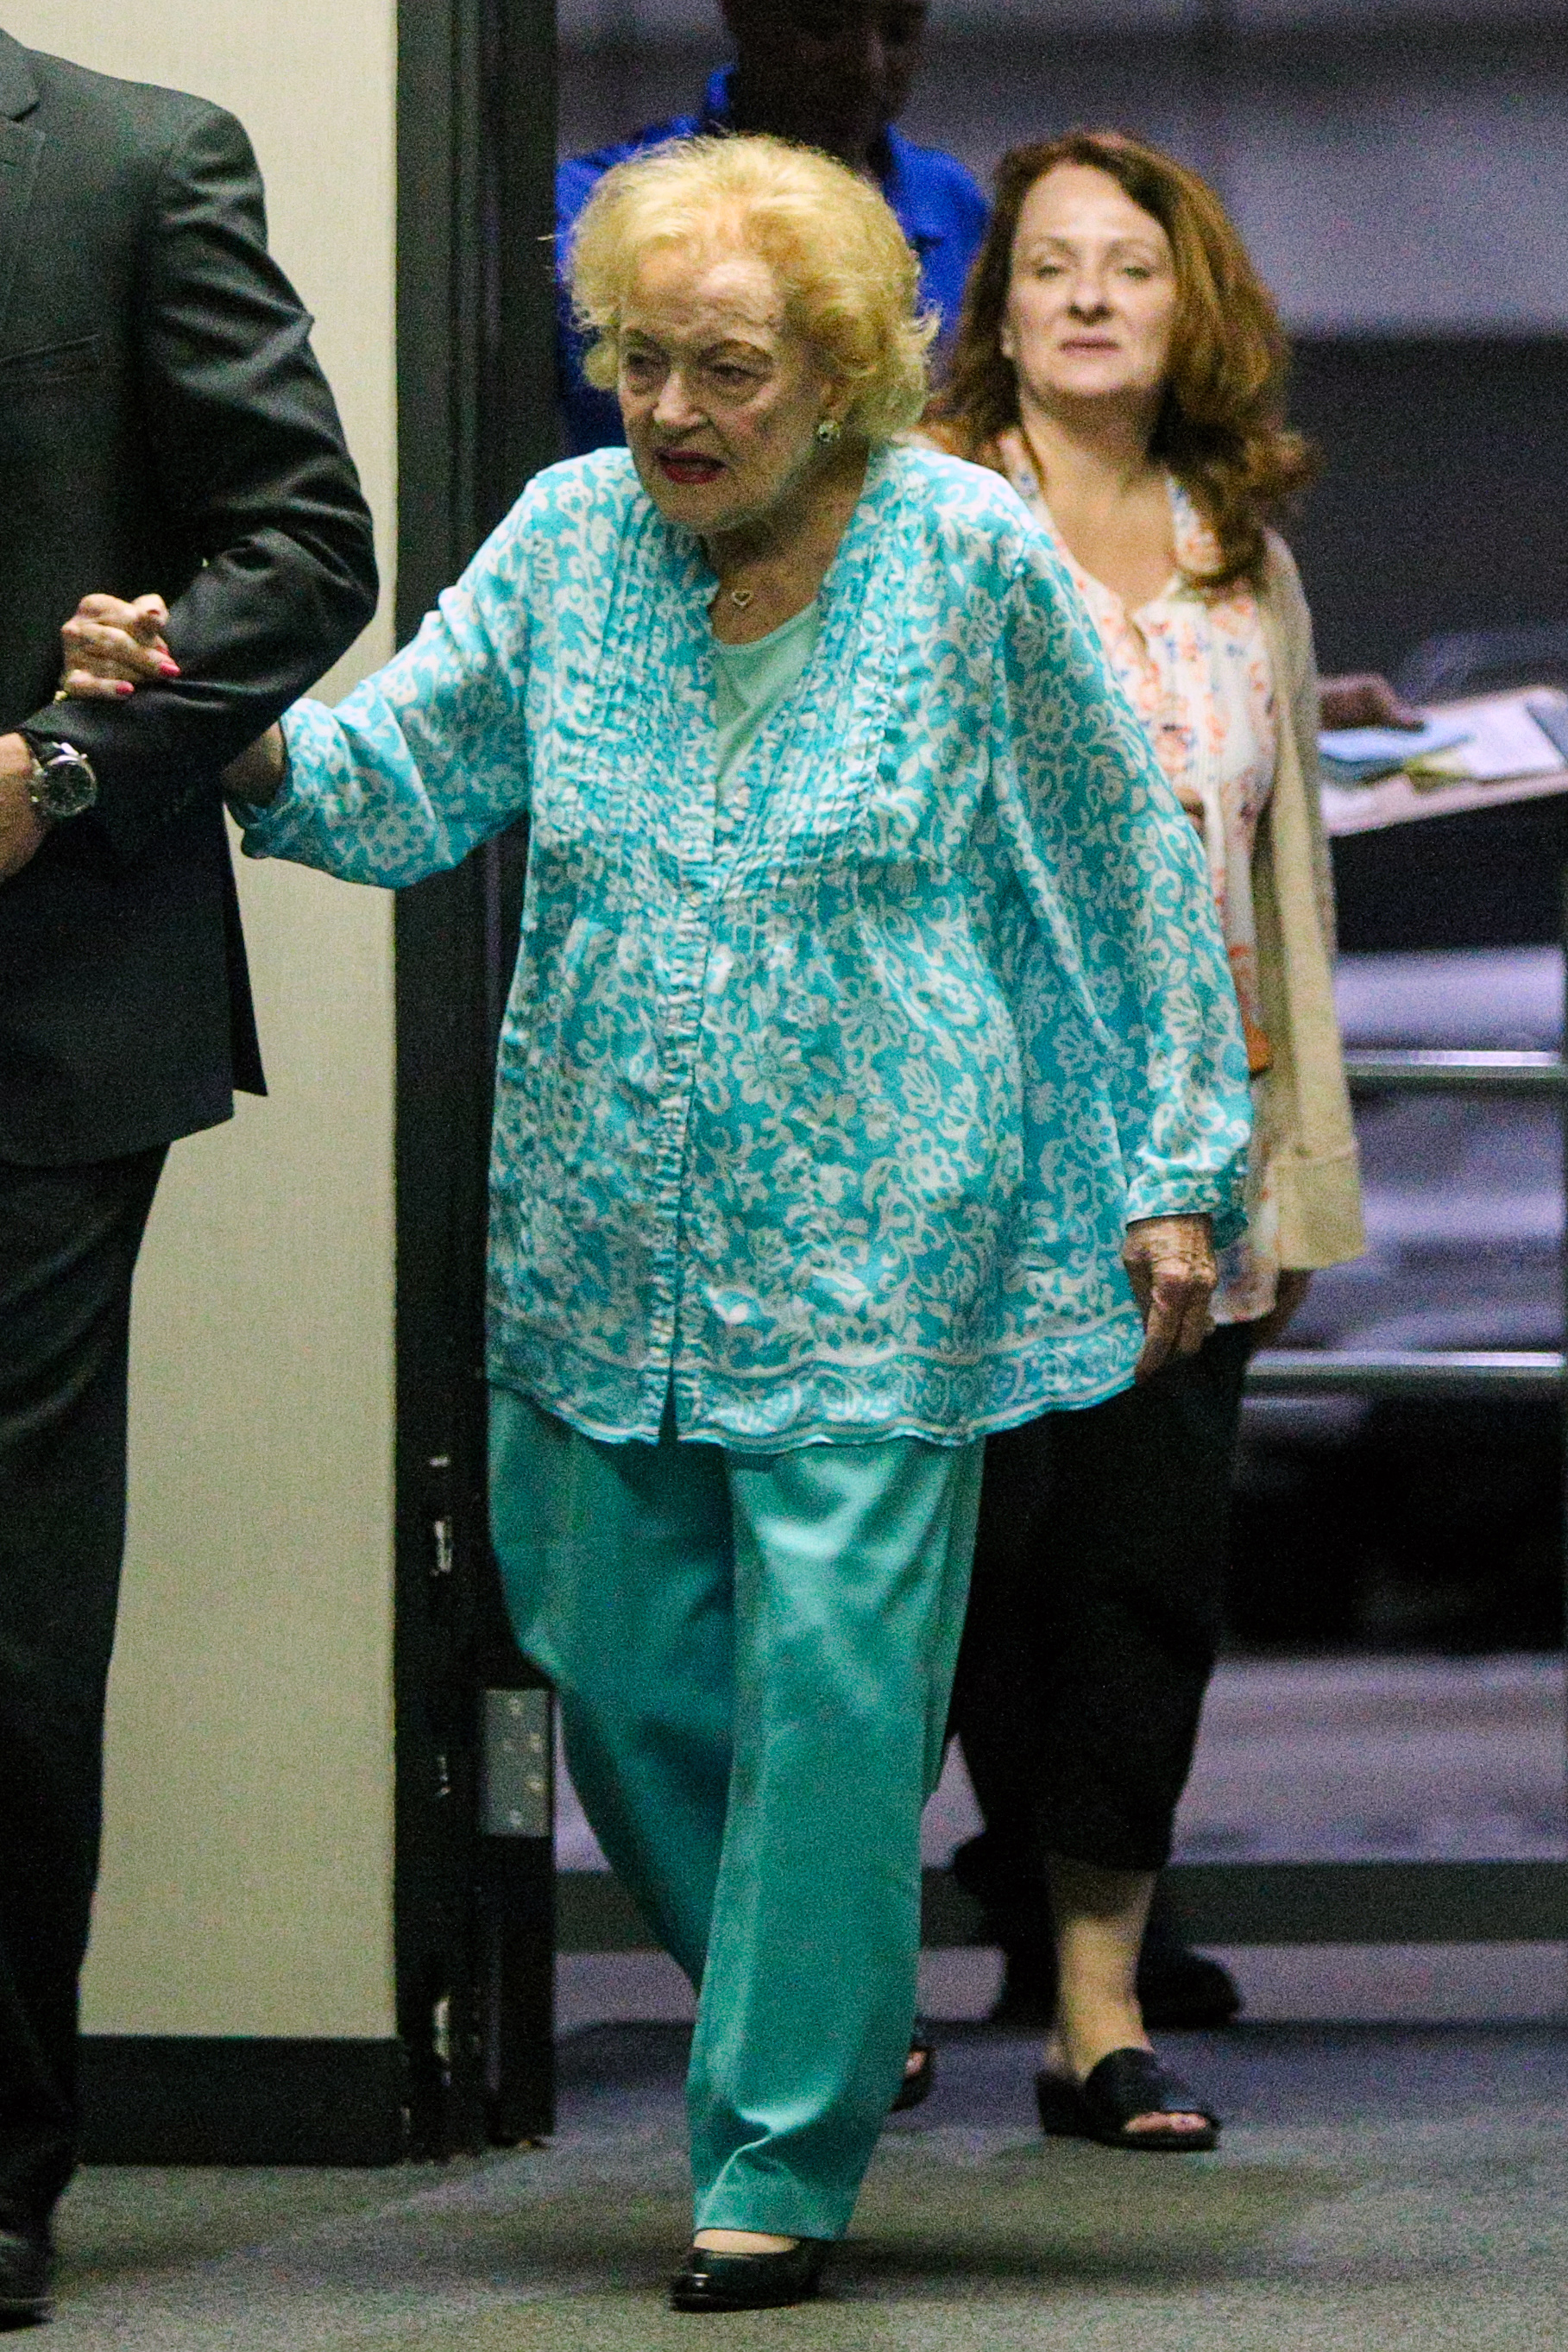 Betty White Steps Out in Rare Public Outing and Looks Great | Closer Weekly